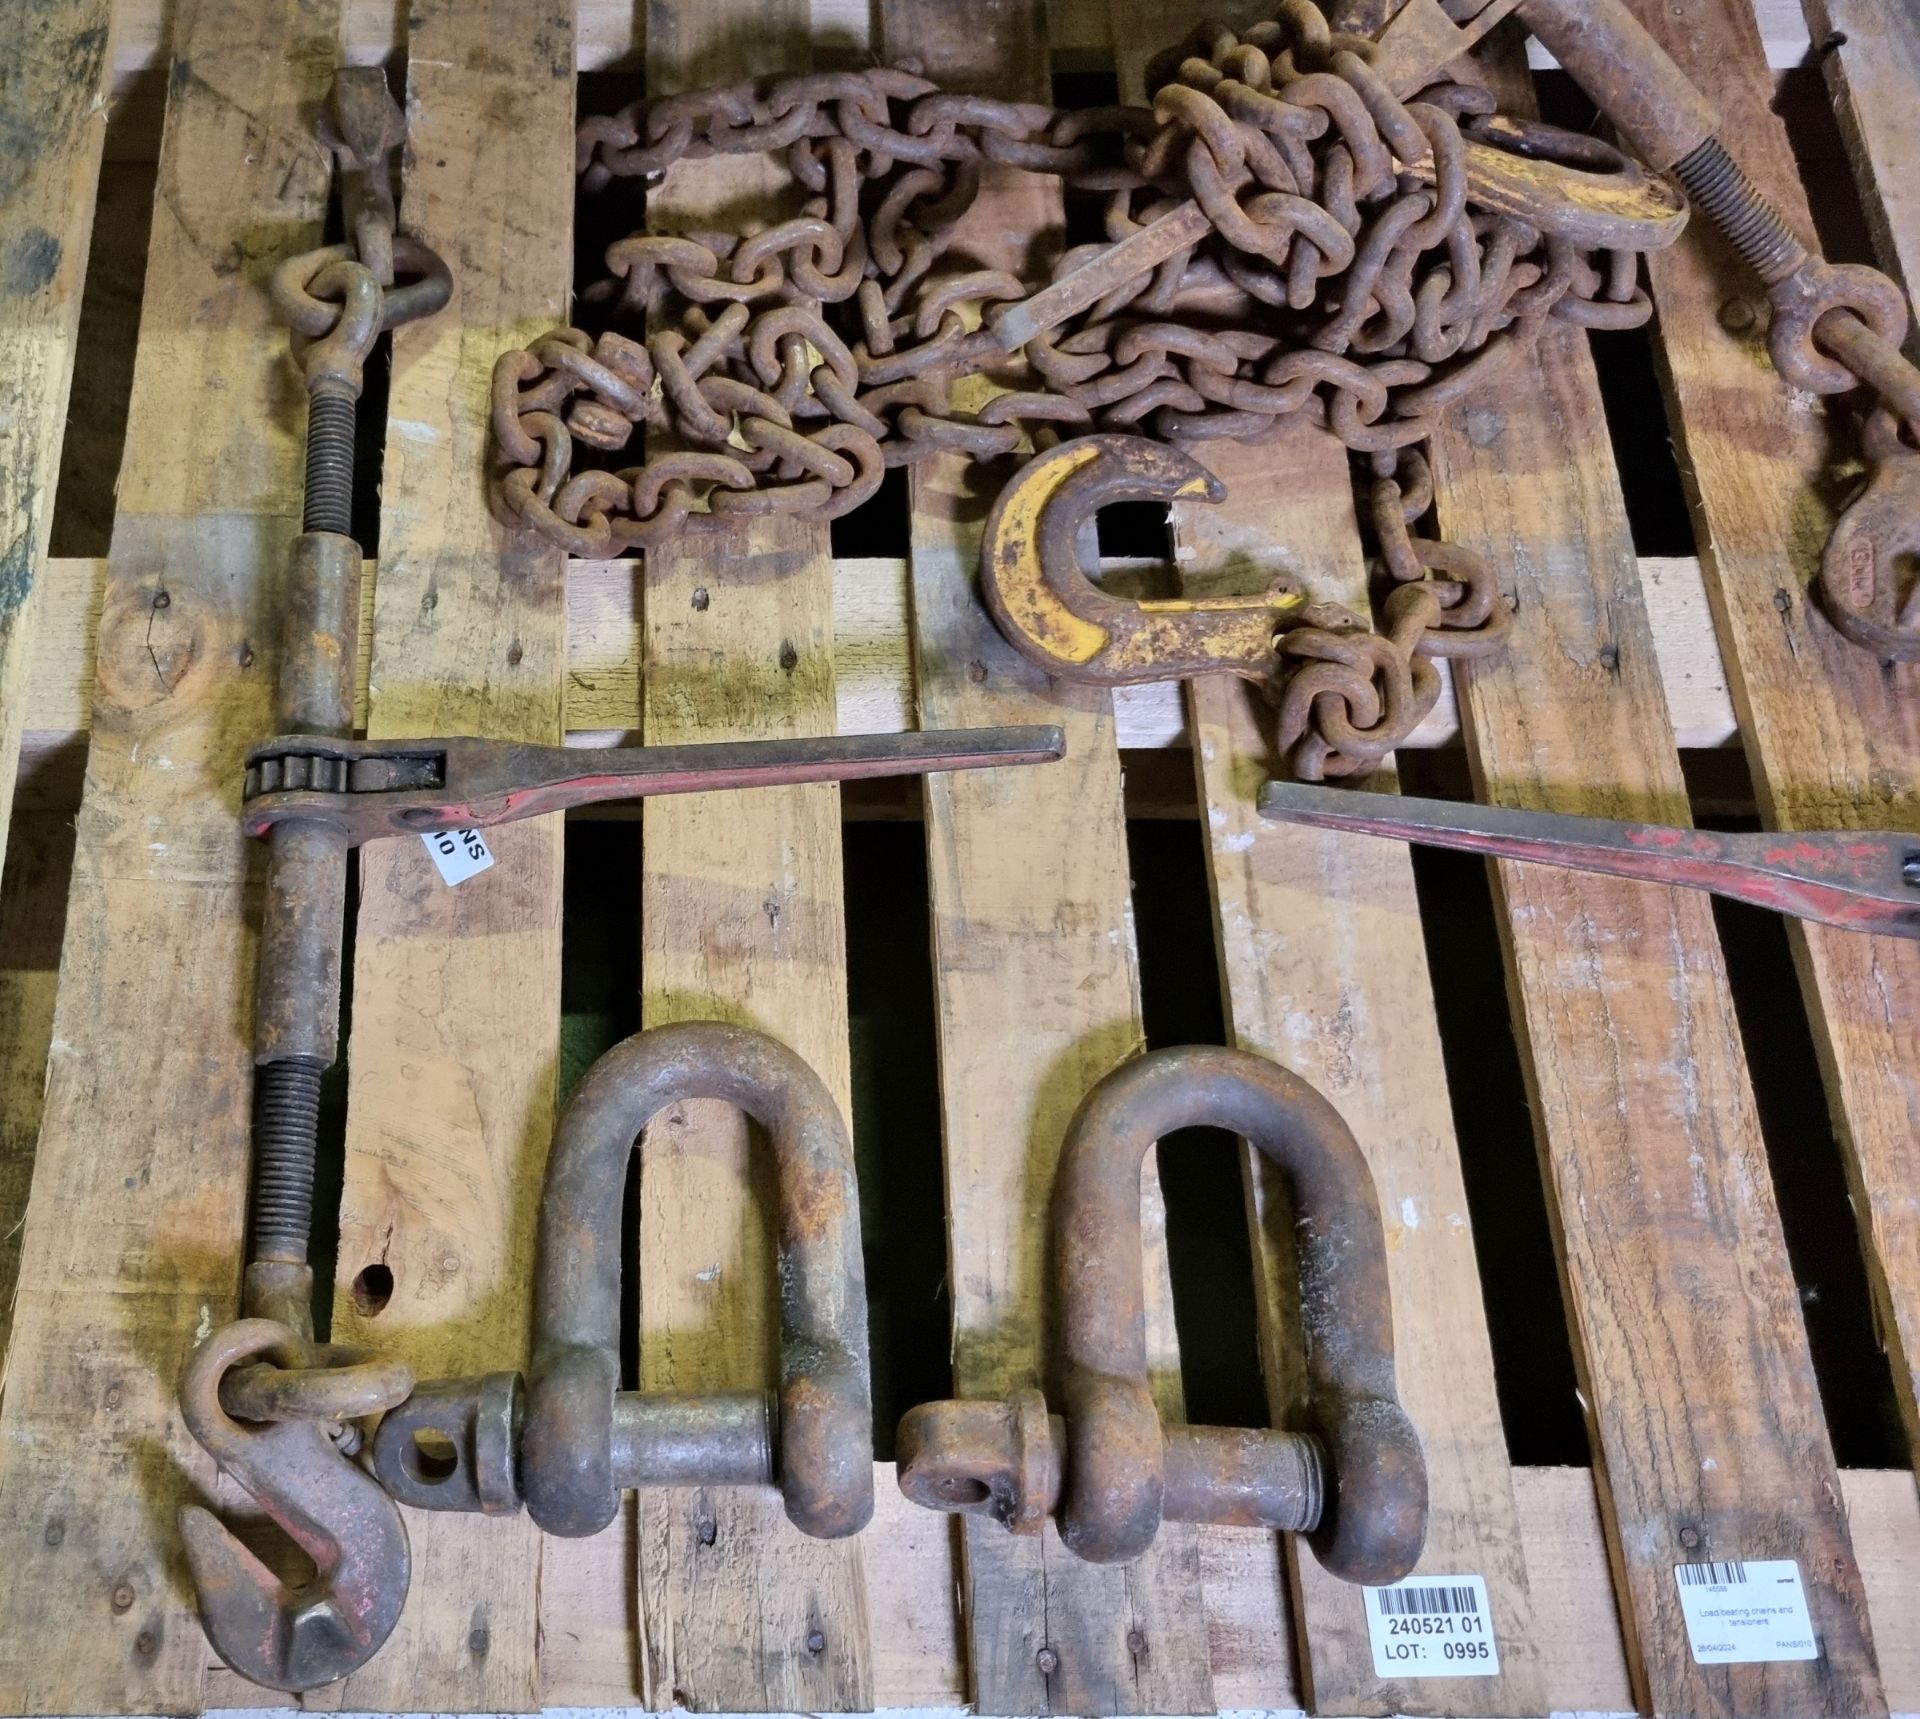 Load bearing chains and tensioners - Image 4 of 6